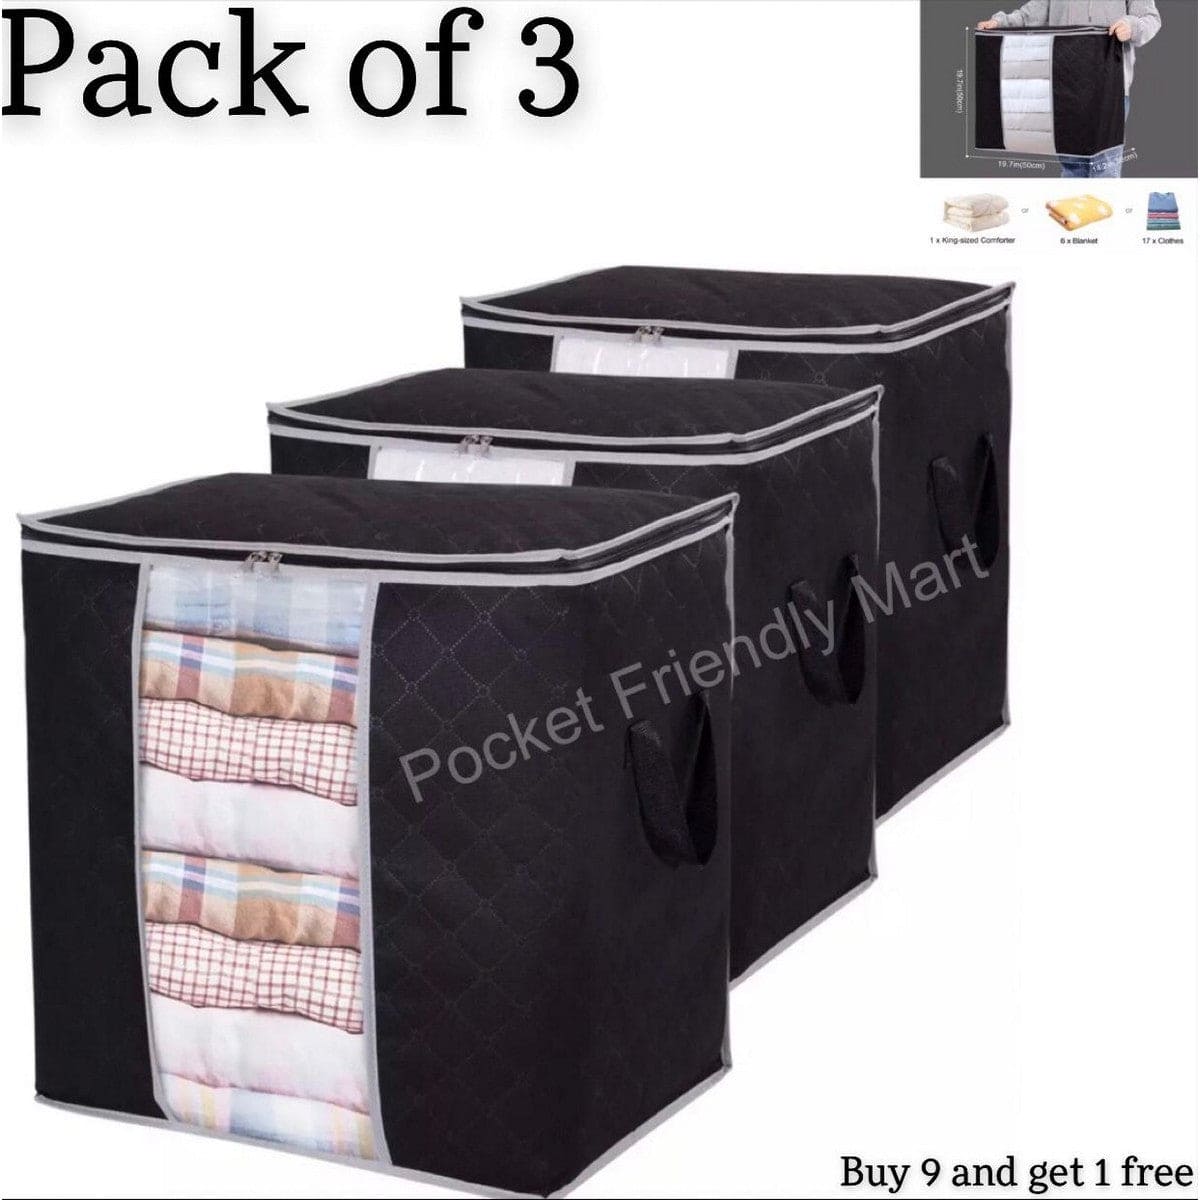 Pack Of 3 - 110gsm New Waterproof Home Storage Bag foldable non woven Oxford Cloth Bedding Suits Pillows Closet Organizer bags Organizer Zipper Bag (Random Color)